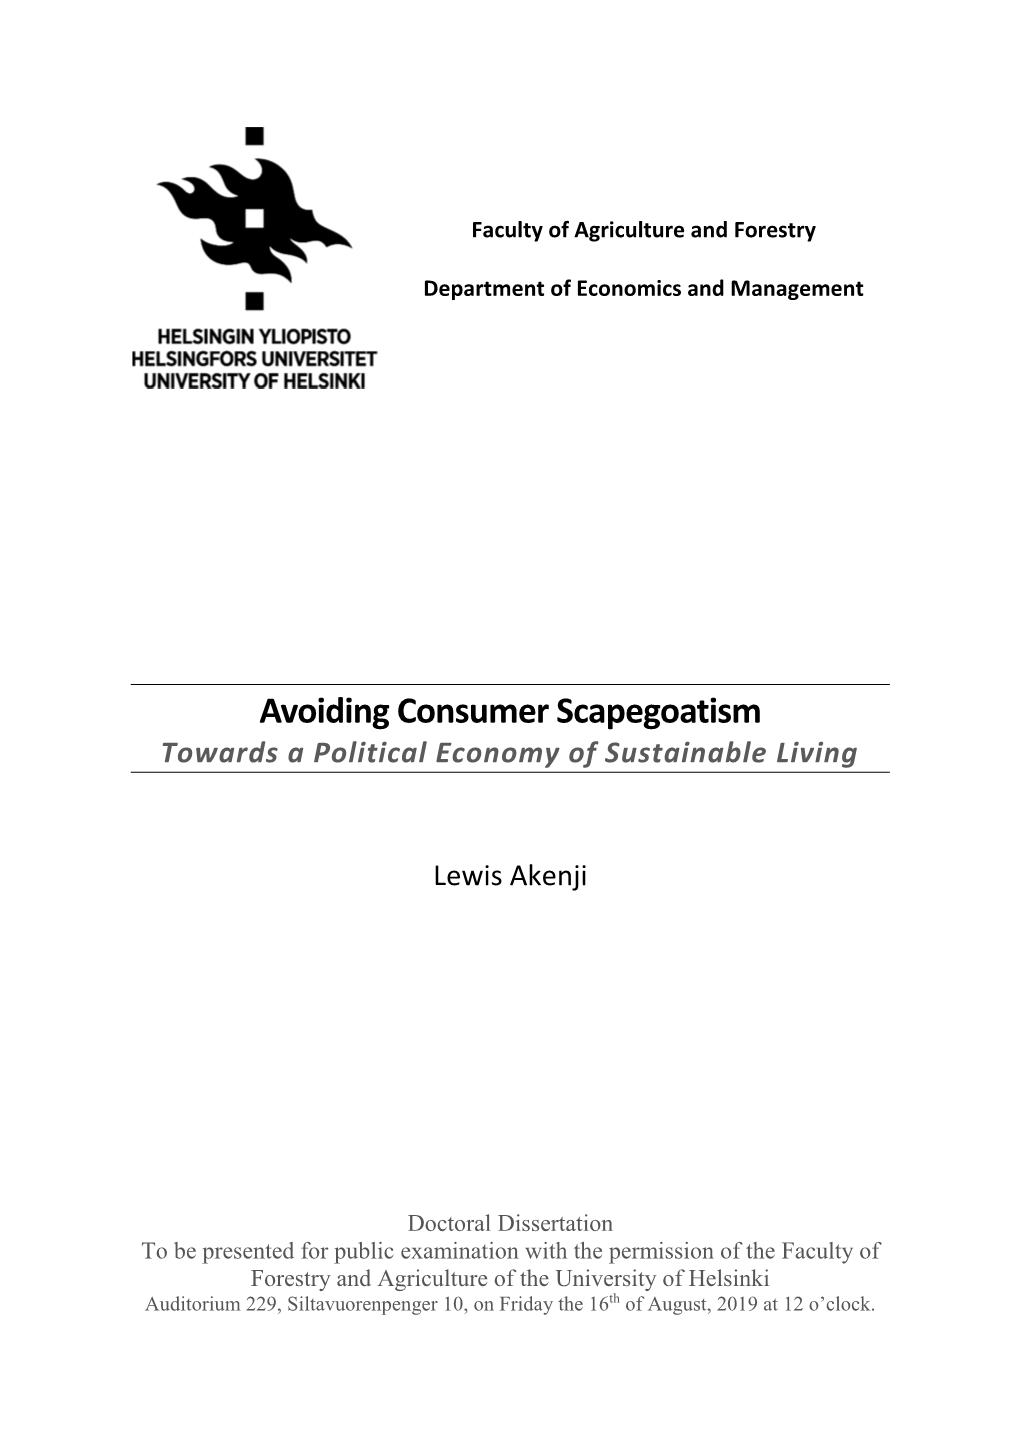 Avoiding Consumer Scapegoatism Towards a Political Economy of Sustainable Living